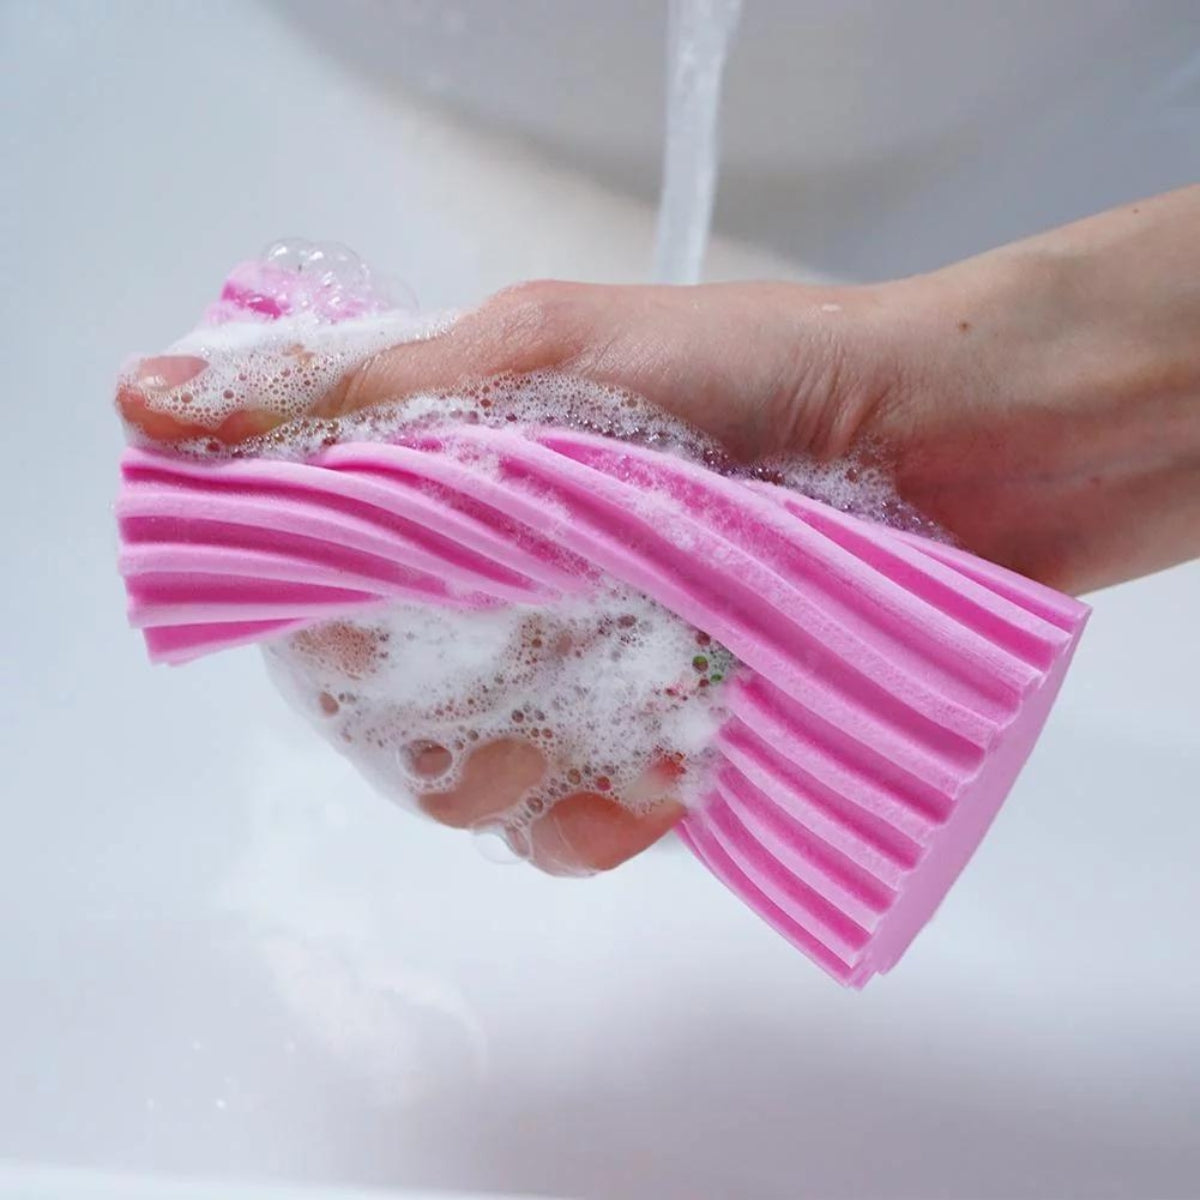 SwiftSorb Sponges | Best Cleaning Sponges 2023 (3 3 FREE)